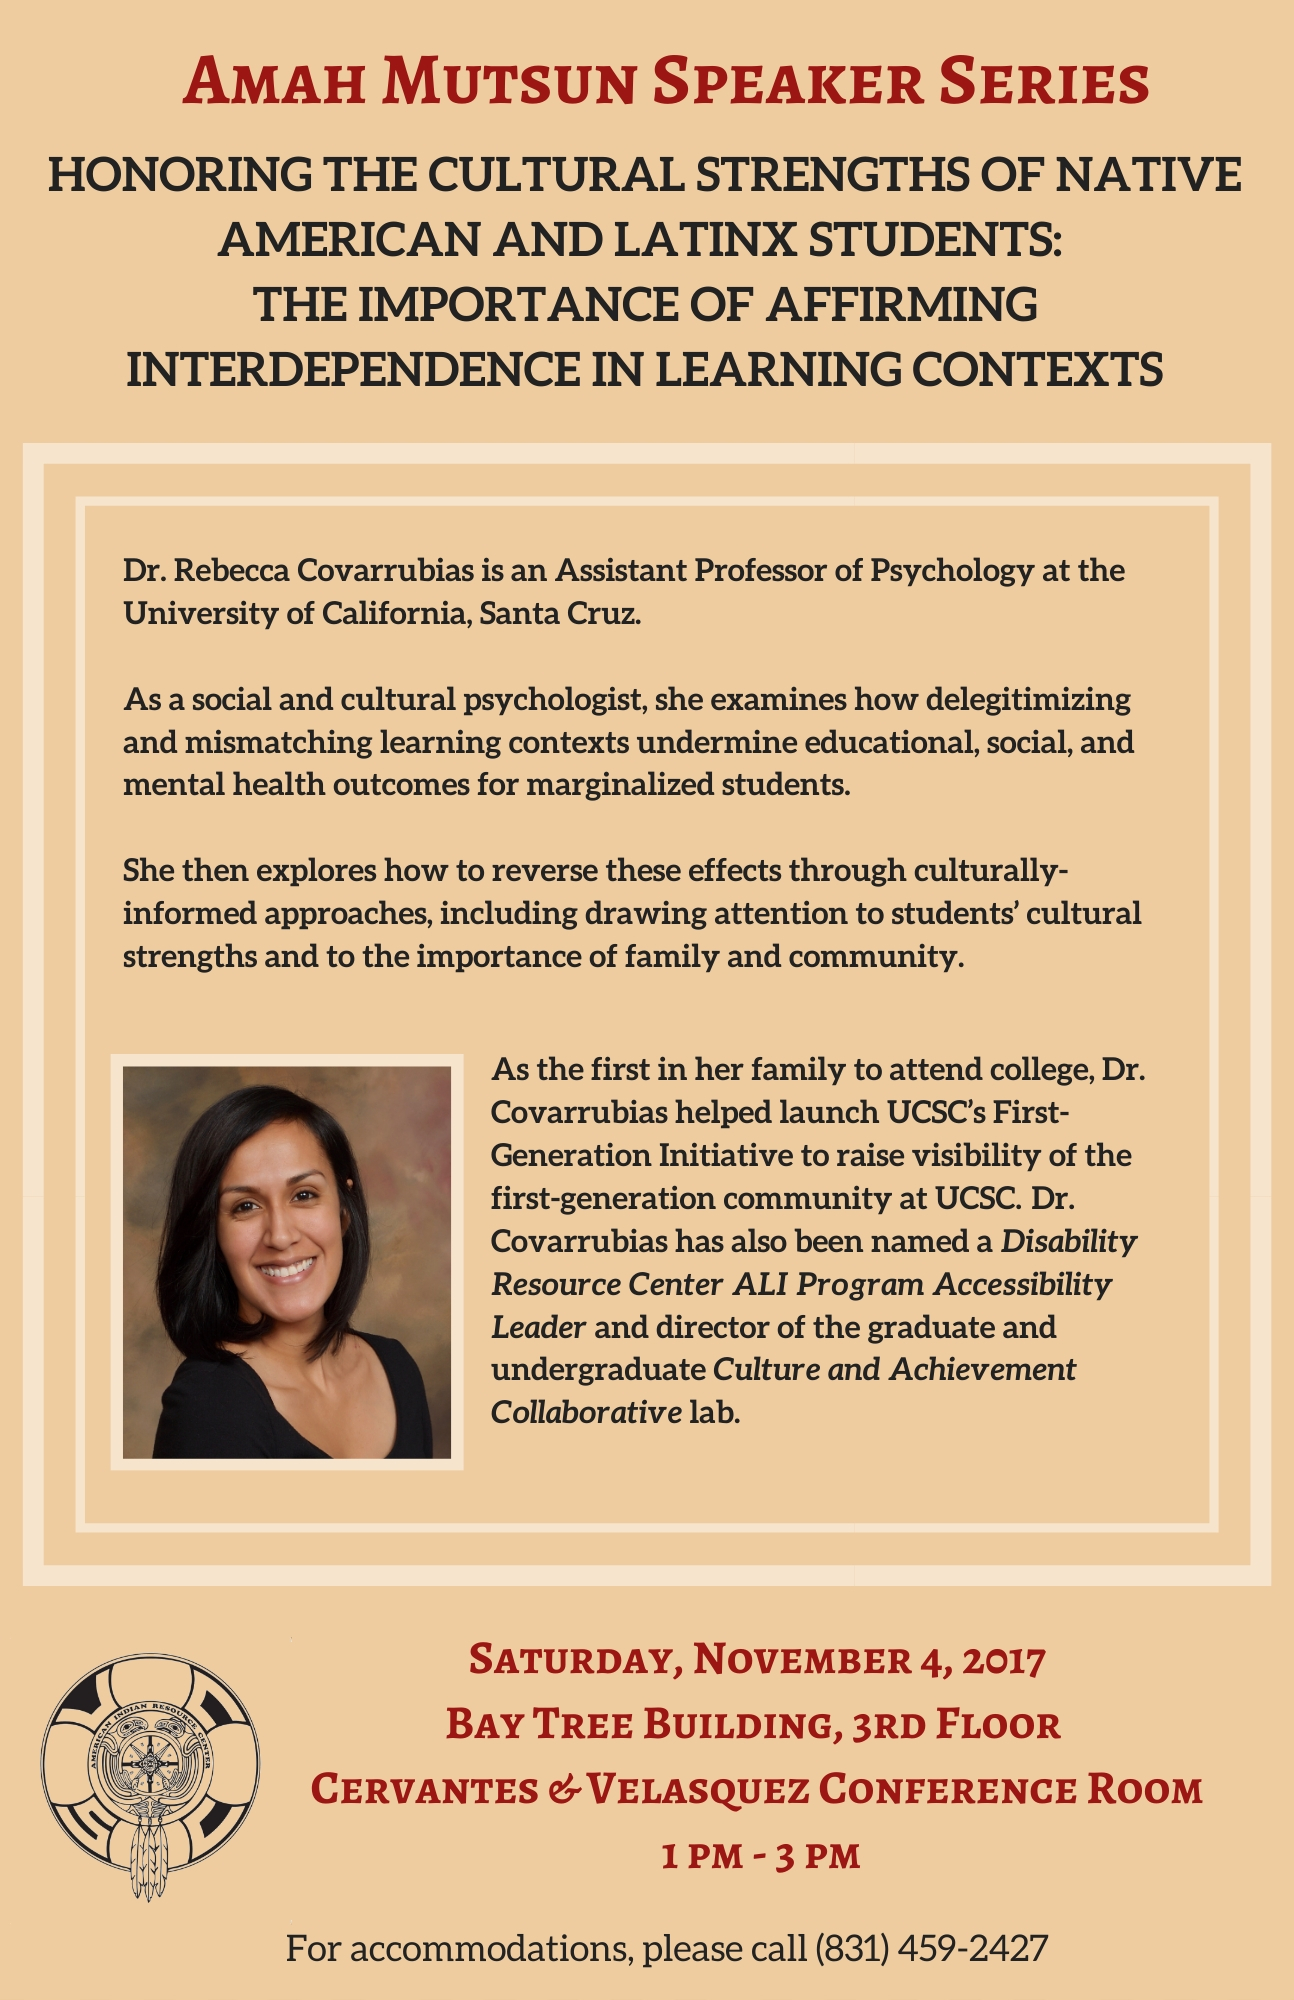 Amah Mutsun Speaker Series: Honoring the Cultural Strengths of Native American and Latinx Studies with Dr. Rebecca Covarrubias